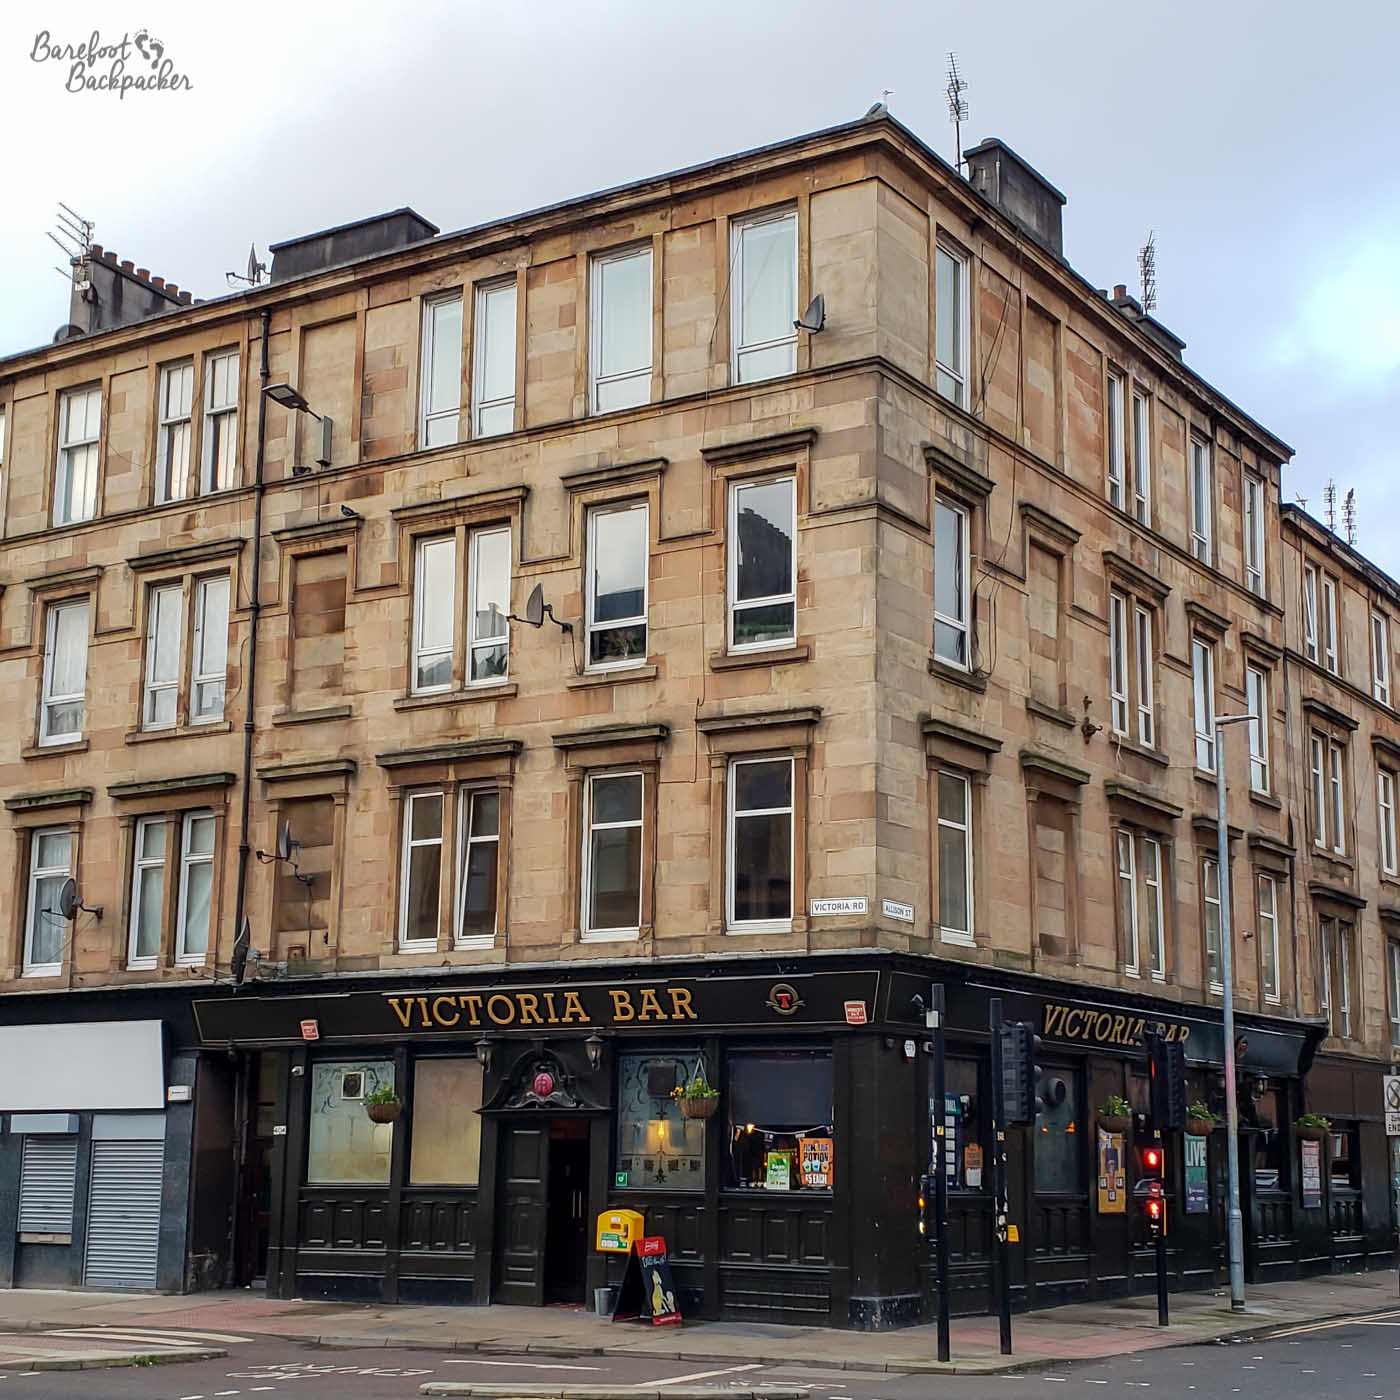 A four-storey tenement block with a pub at the ground level, called the Victoria, stands at a crossroads.